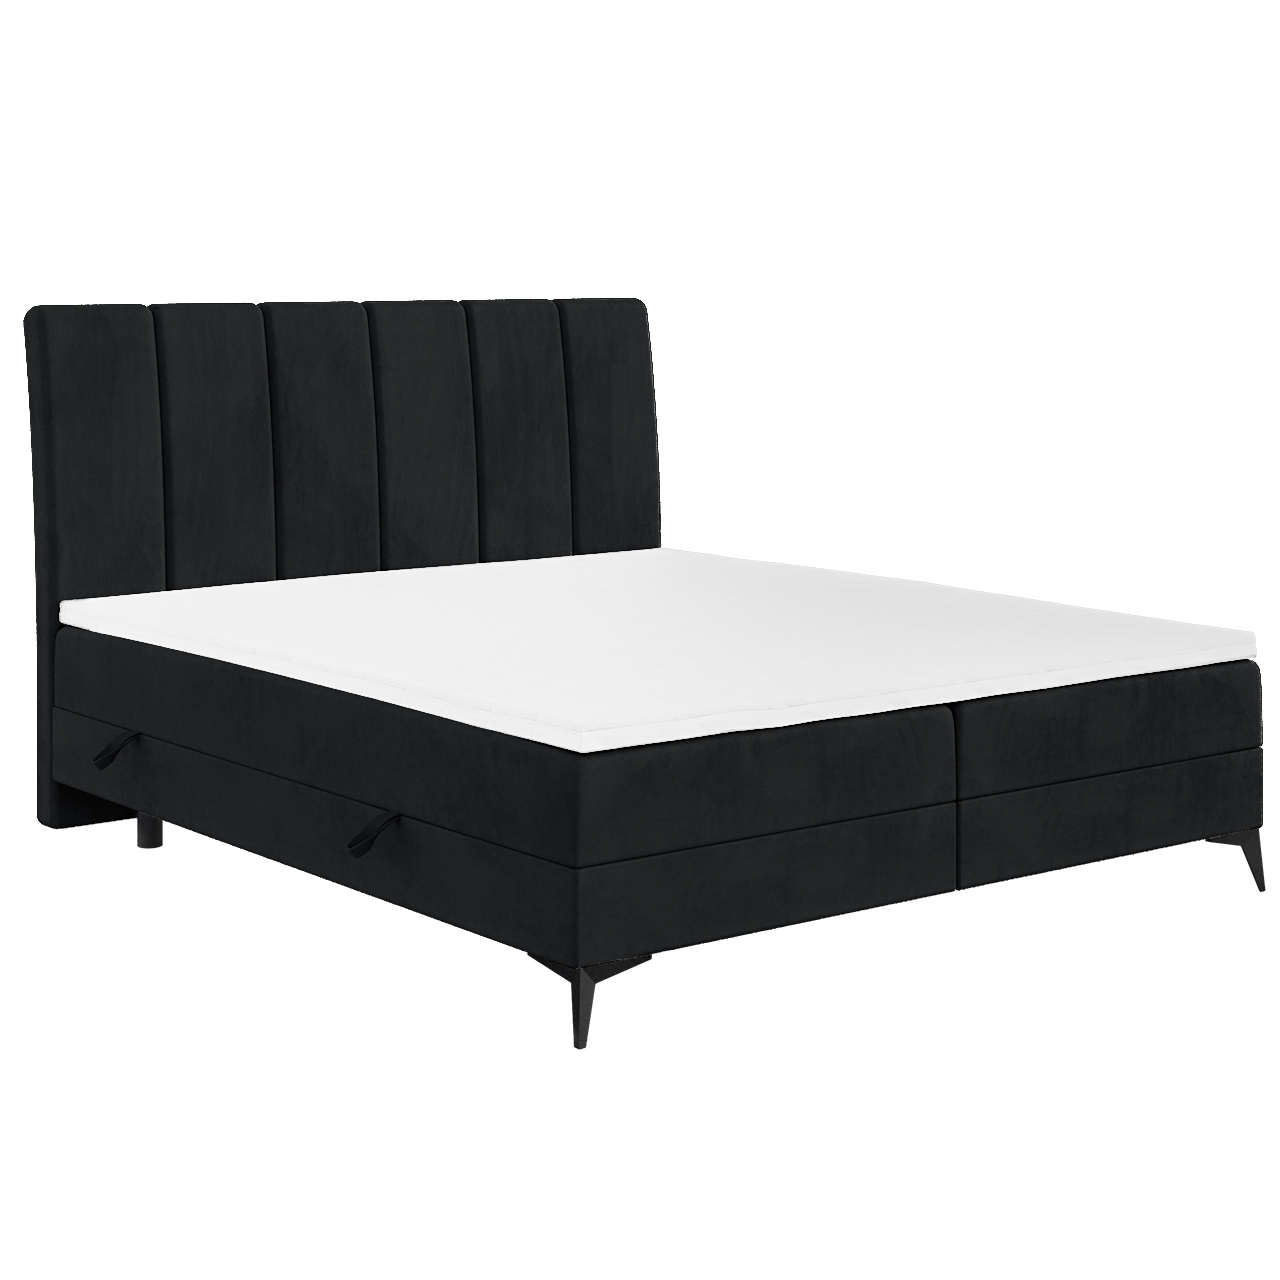 Upholstered bed ABERT 160x200 riviera 100